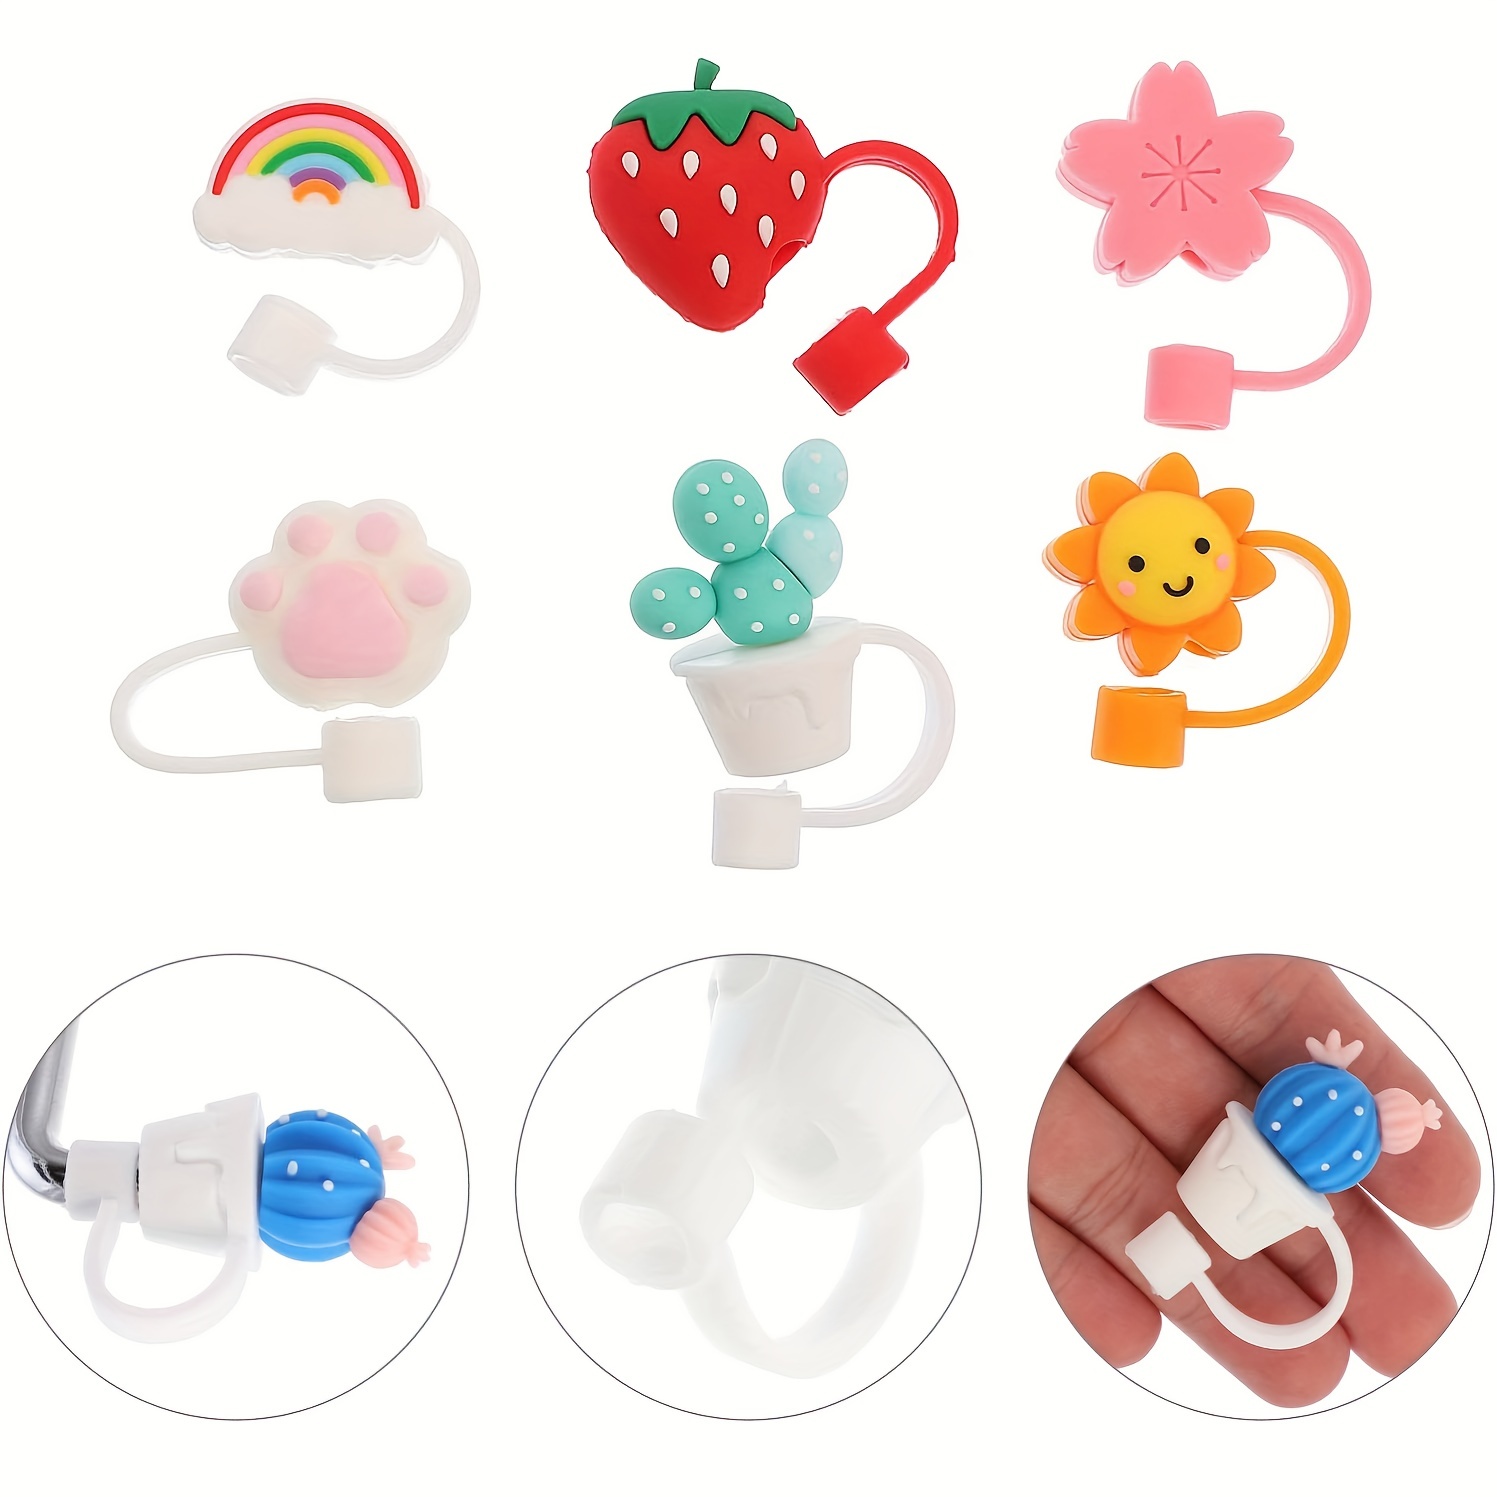 4Pcs 0.4in Diameter Cute Frog Silicone Straw Covers Cap for stanley Cup,  Dust-Proof Drinking Straw Reusable Straw Tips Lids